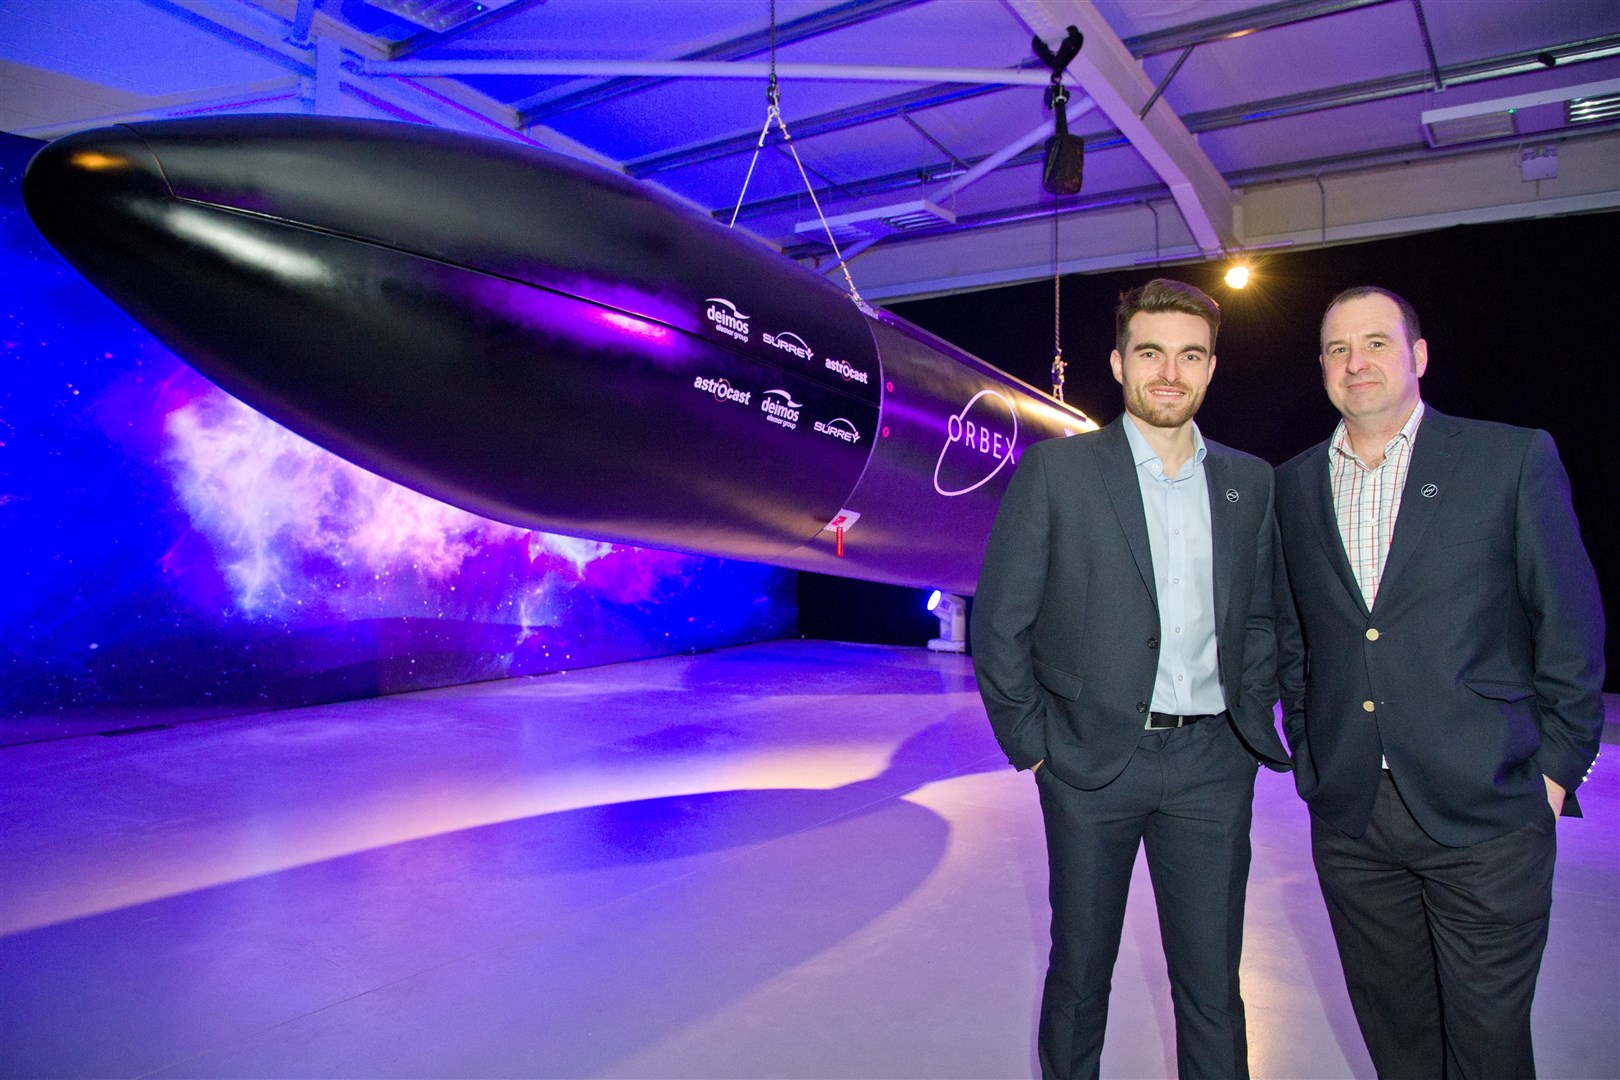 Damien Gueydan and Daniel Byrne from the Forres-based firm Orbex with its state-of-the-art Prime rocket. Picture: Daniel Forsyth.